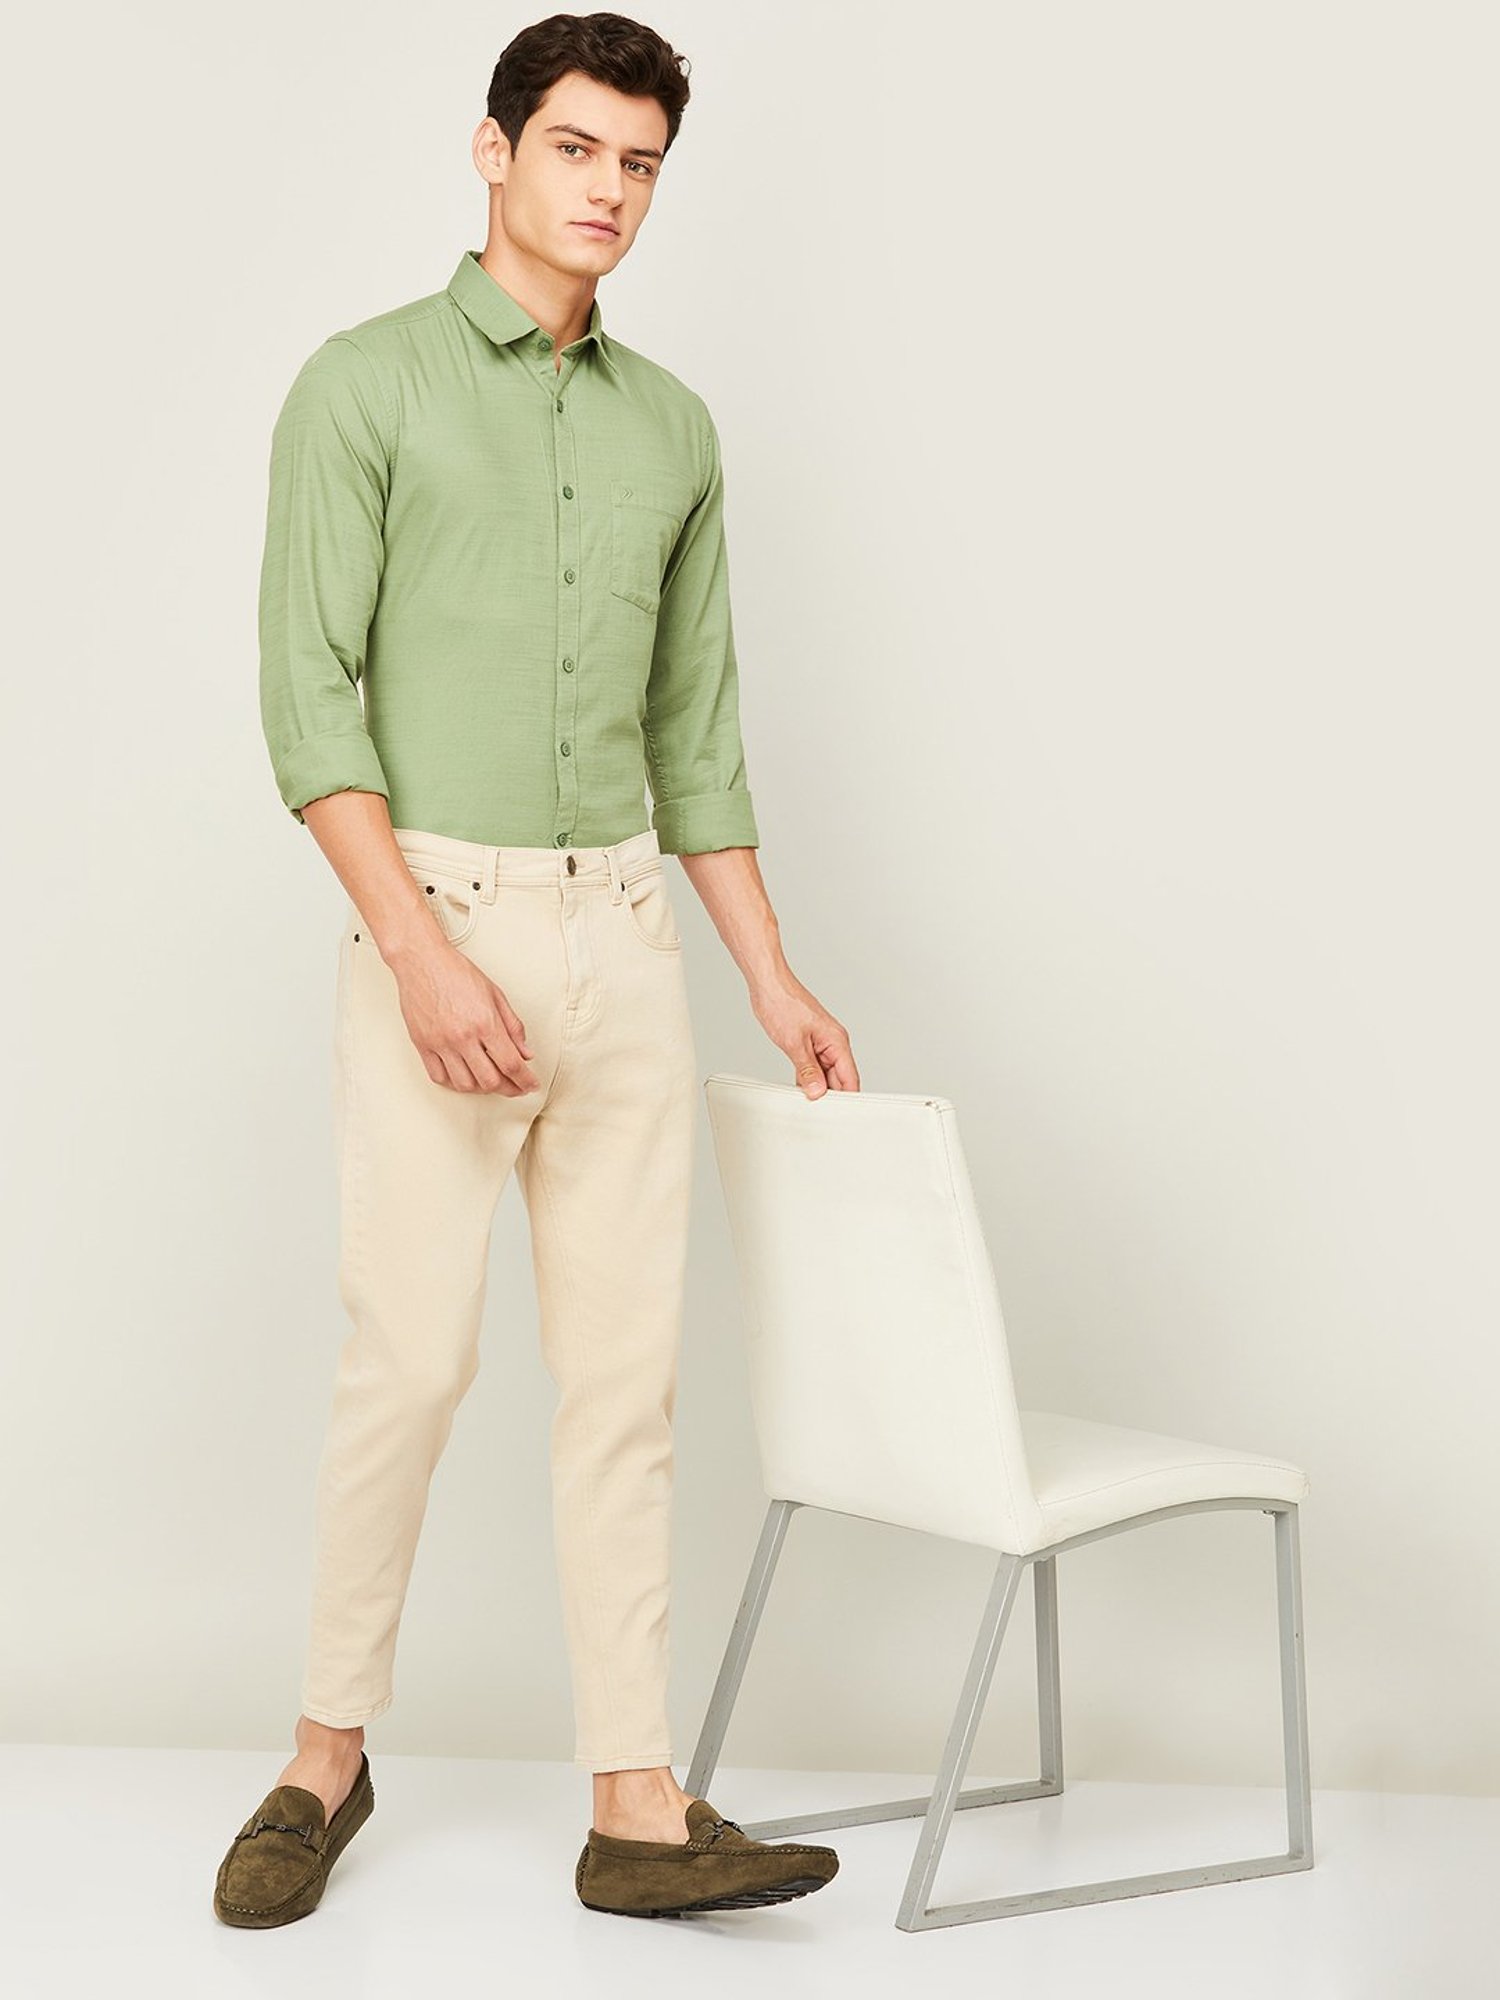 Code by Lifestyle Green Regular Fit Shirt